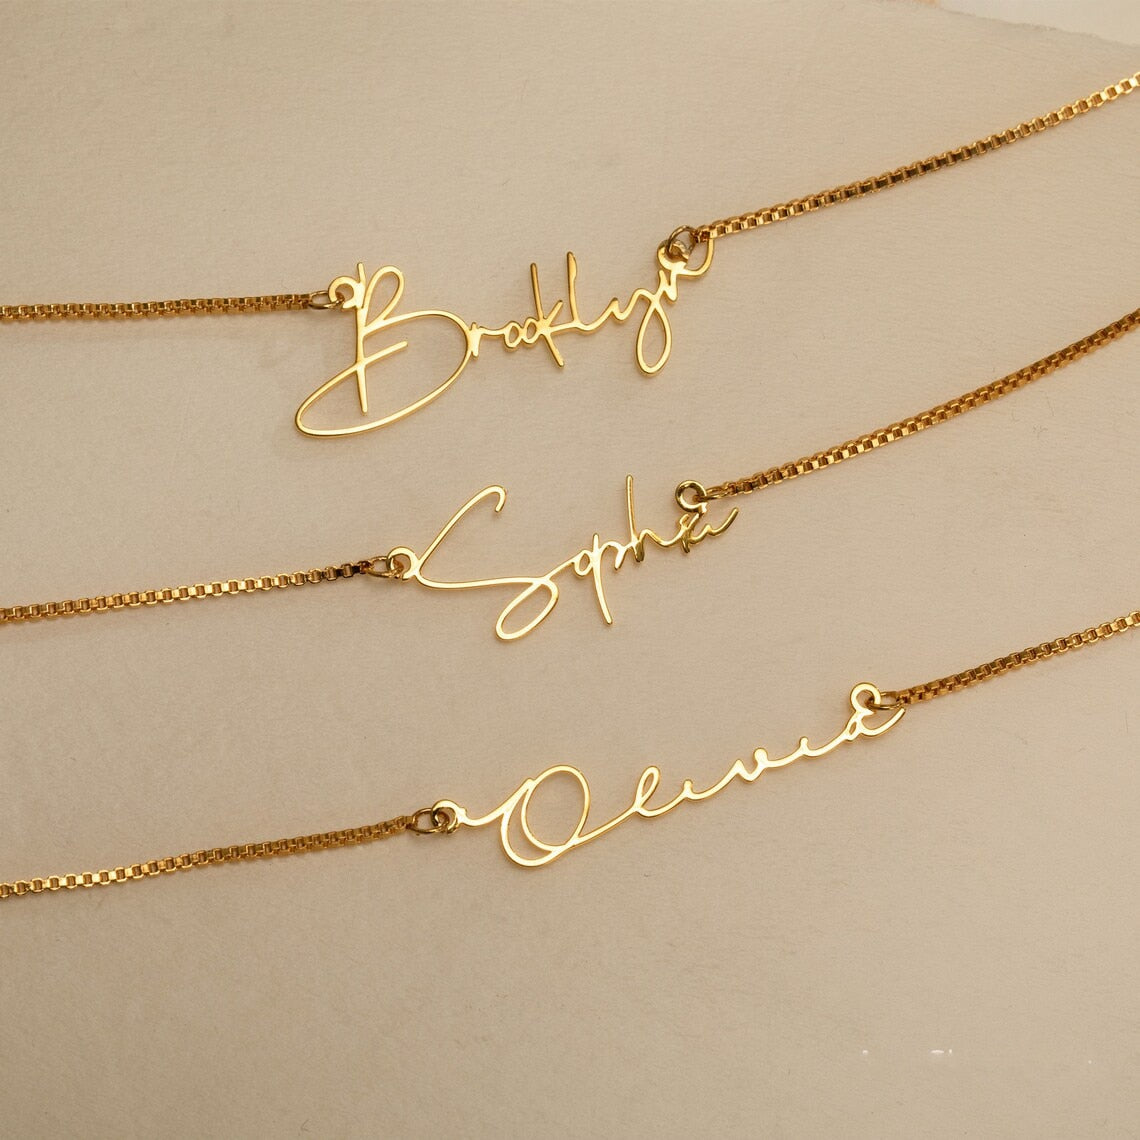 Personalized Gold Name Necklace